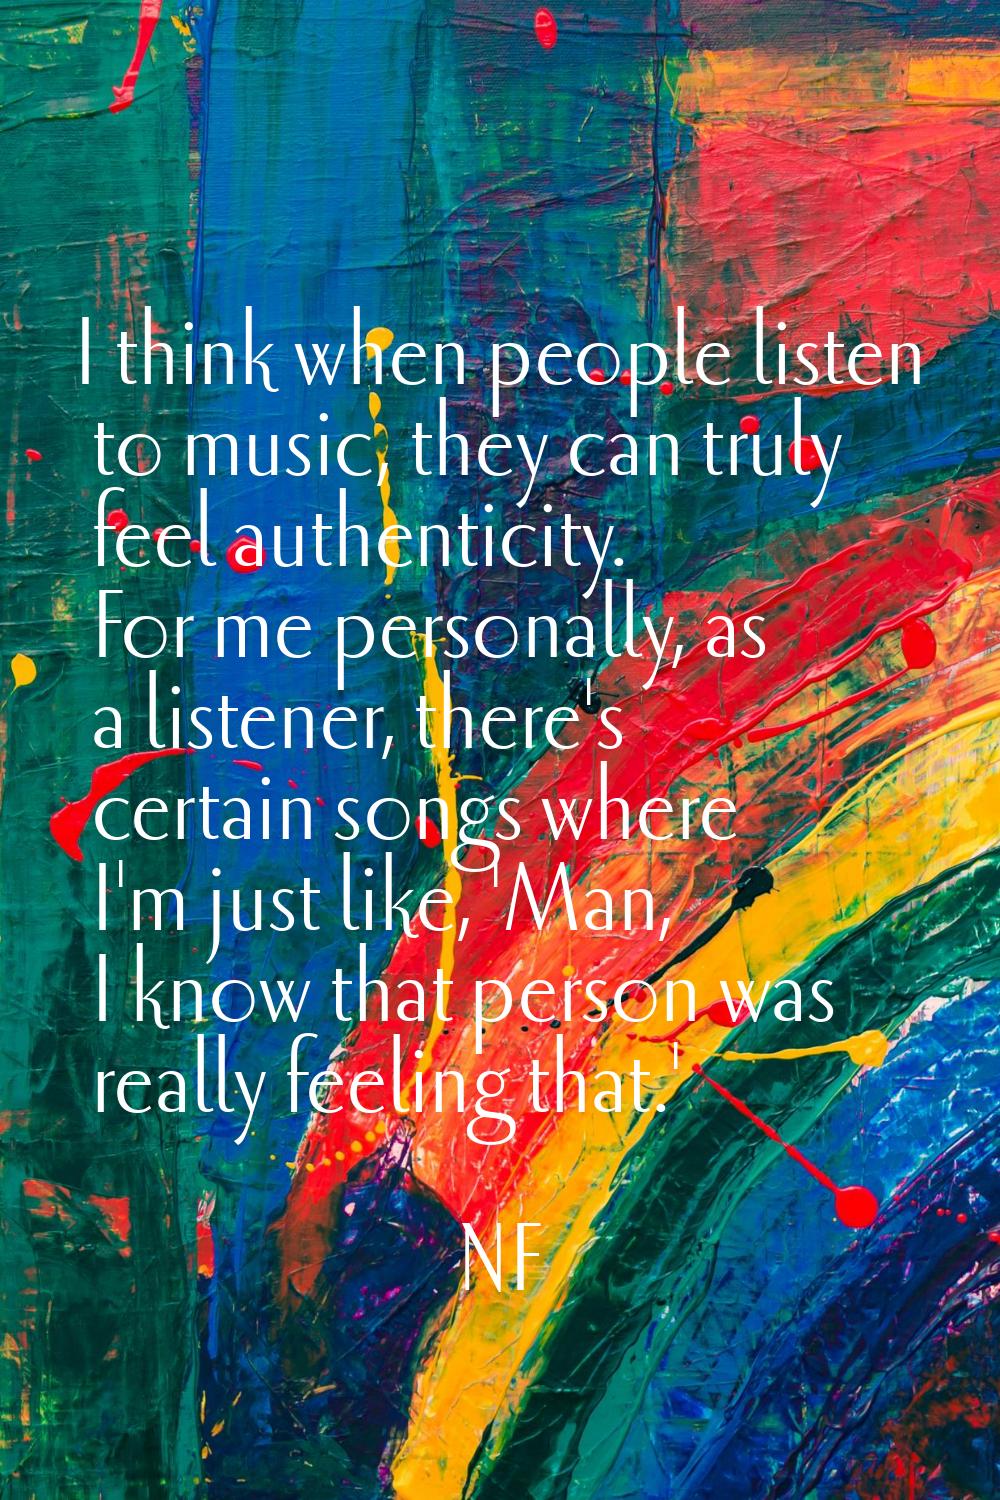 I think when people listen to music, they can truly feel authenticity. For me personally, as a list